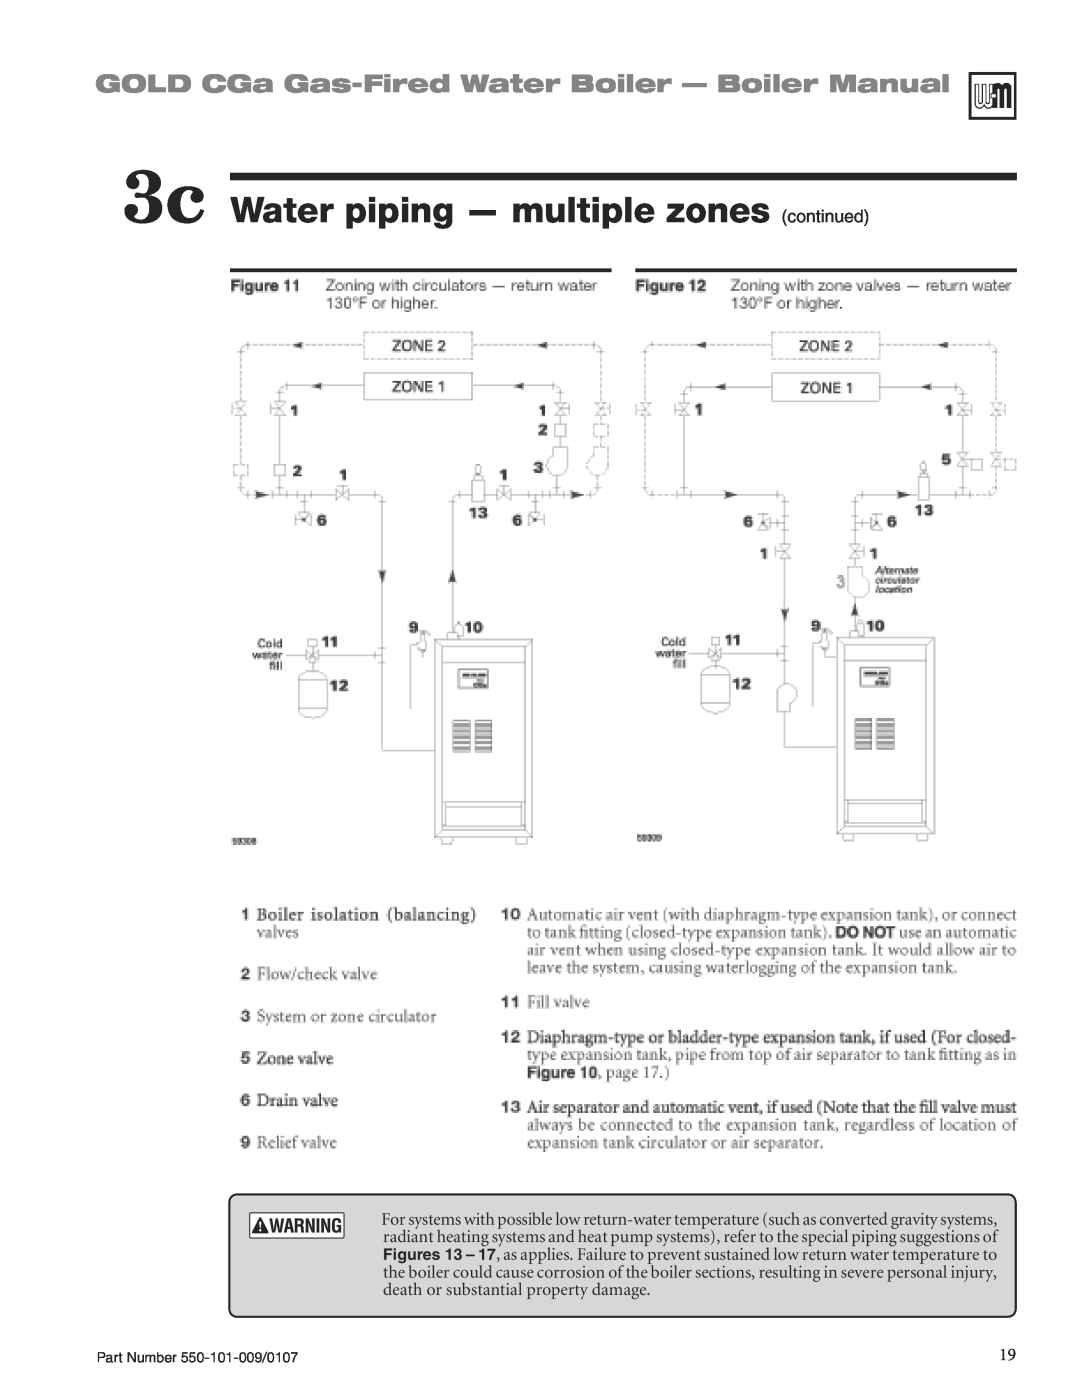 Weil-McLain CGA25SPDN manual 3c Water piping - multiple zones continued, GOLD CGa Gas-FiredWater Boiler - Boiler Manual 